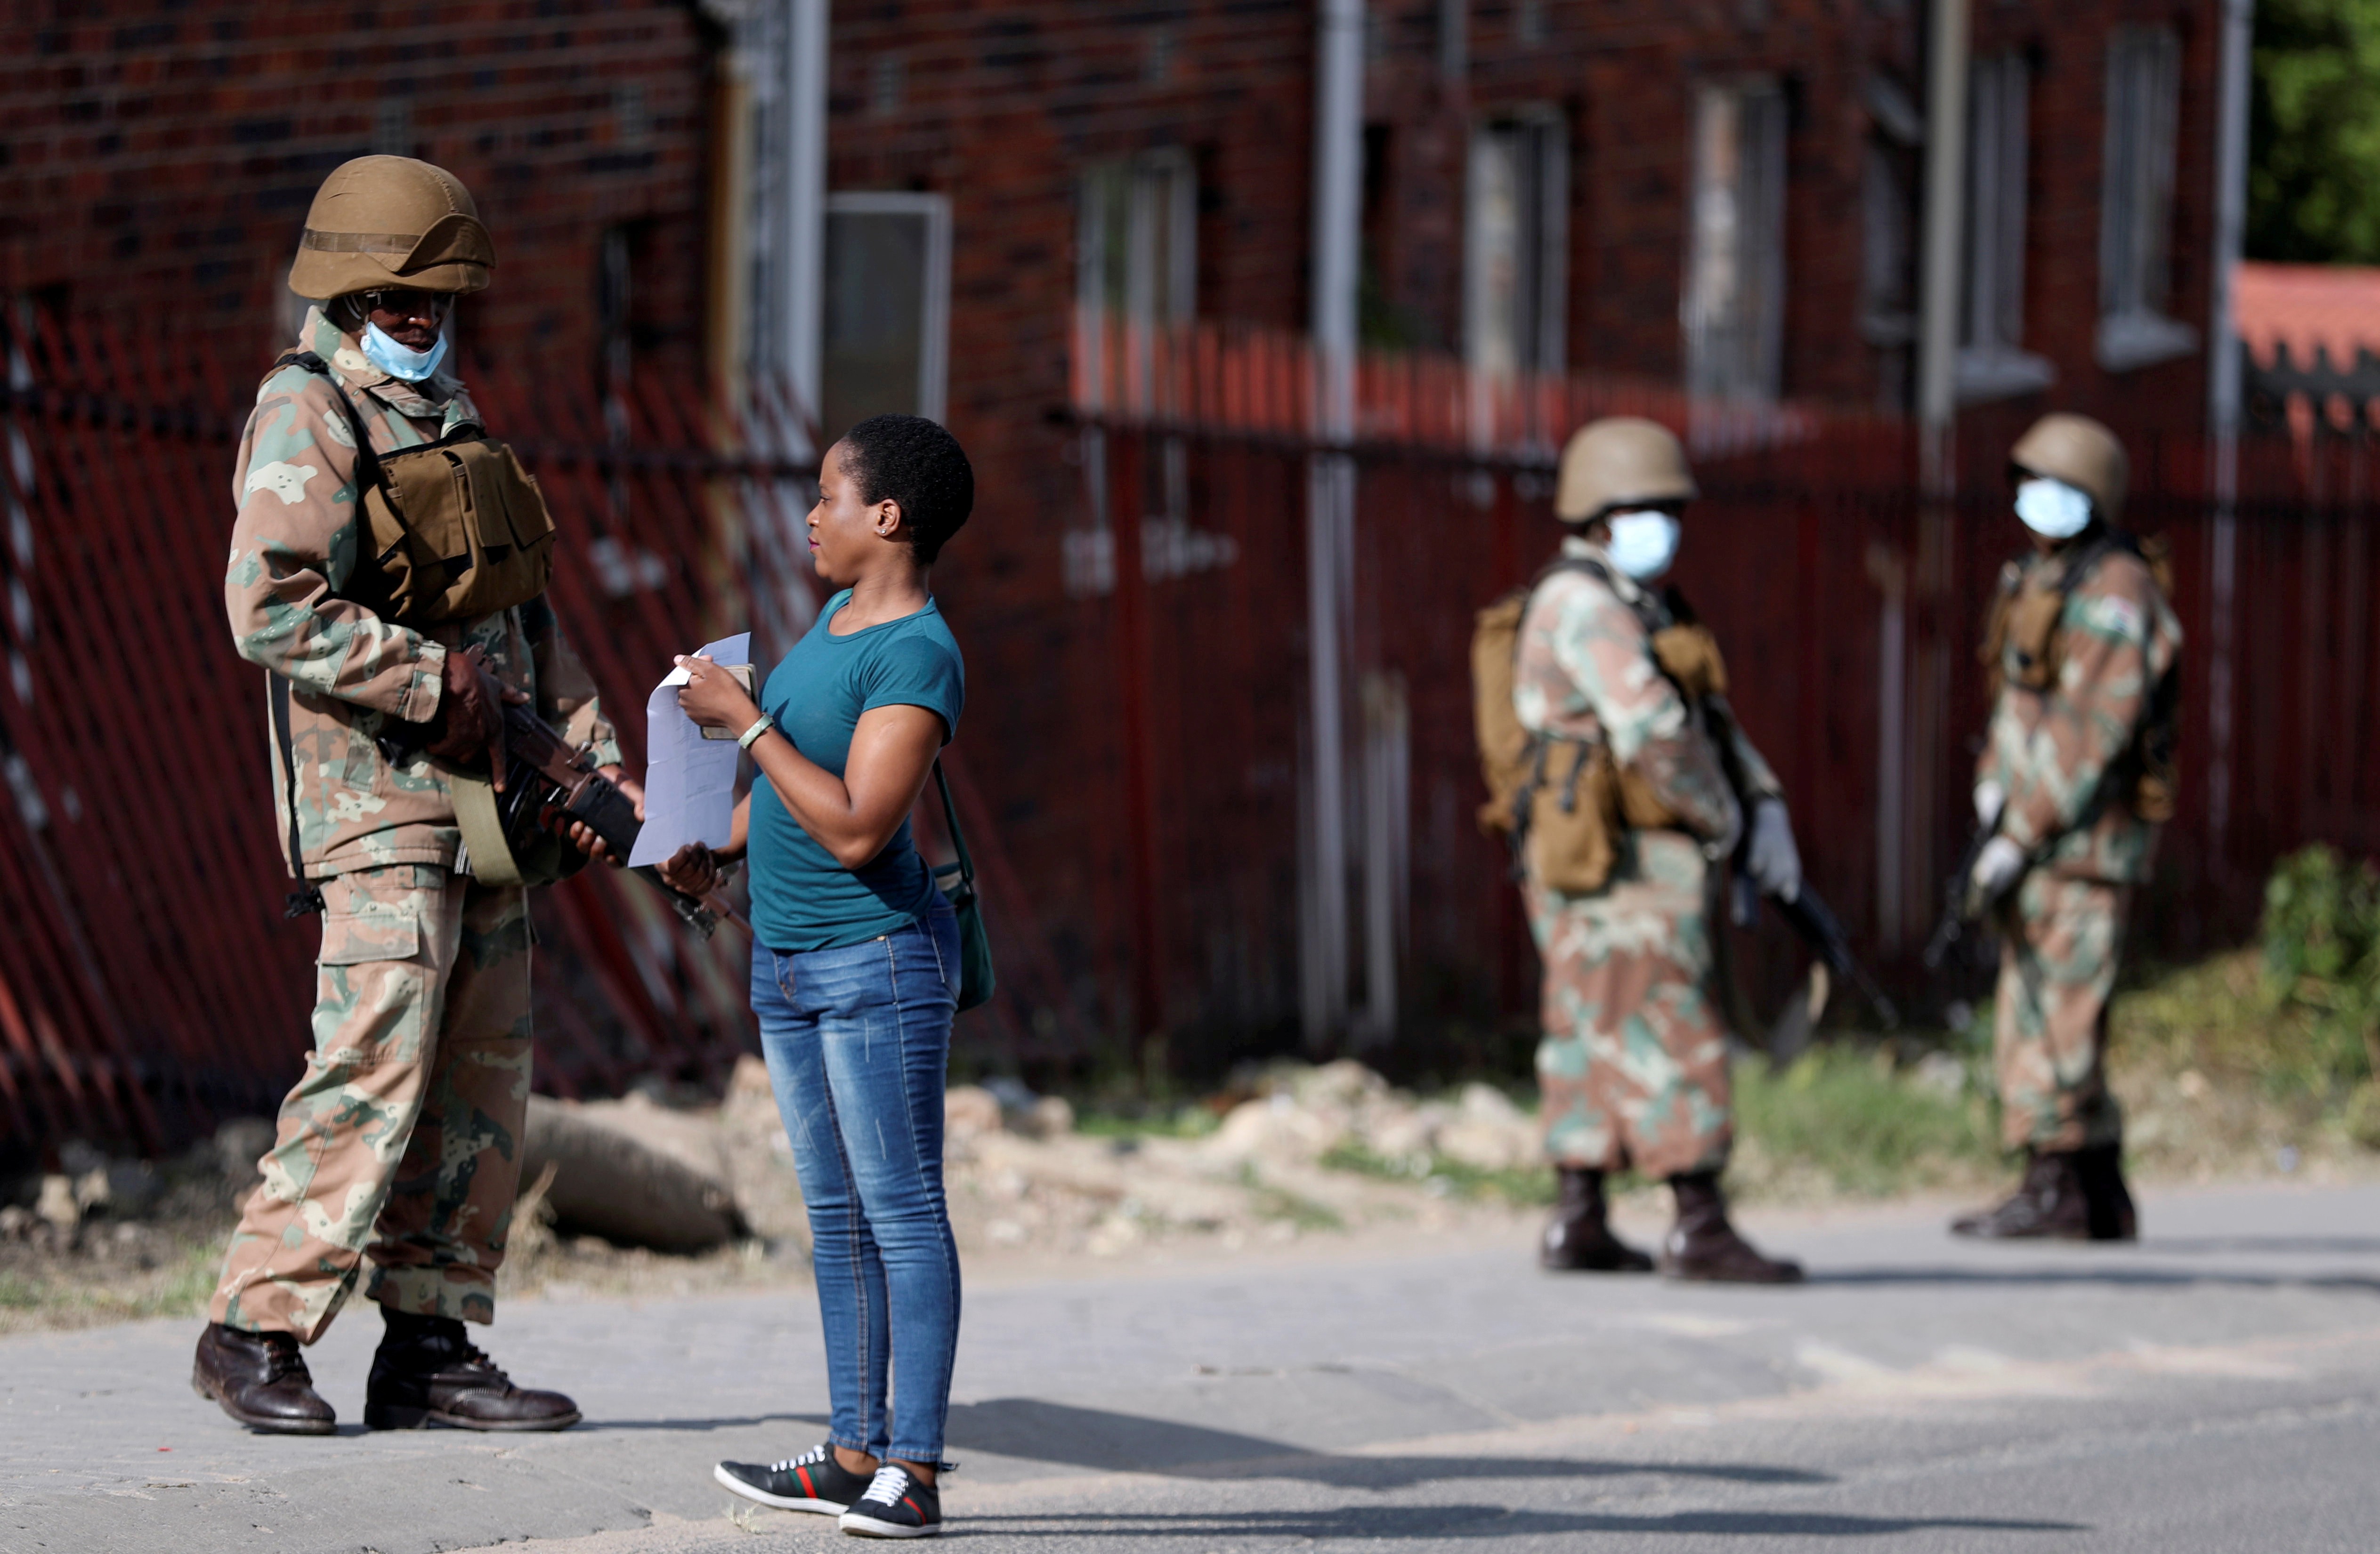 A South African soldier checks the documents of a resident of Alexandra township, as the military enforces a three-week nationwide lockdown in the country to stem the spread of the coronavirus pandemic. Photo: Reuters